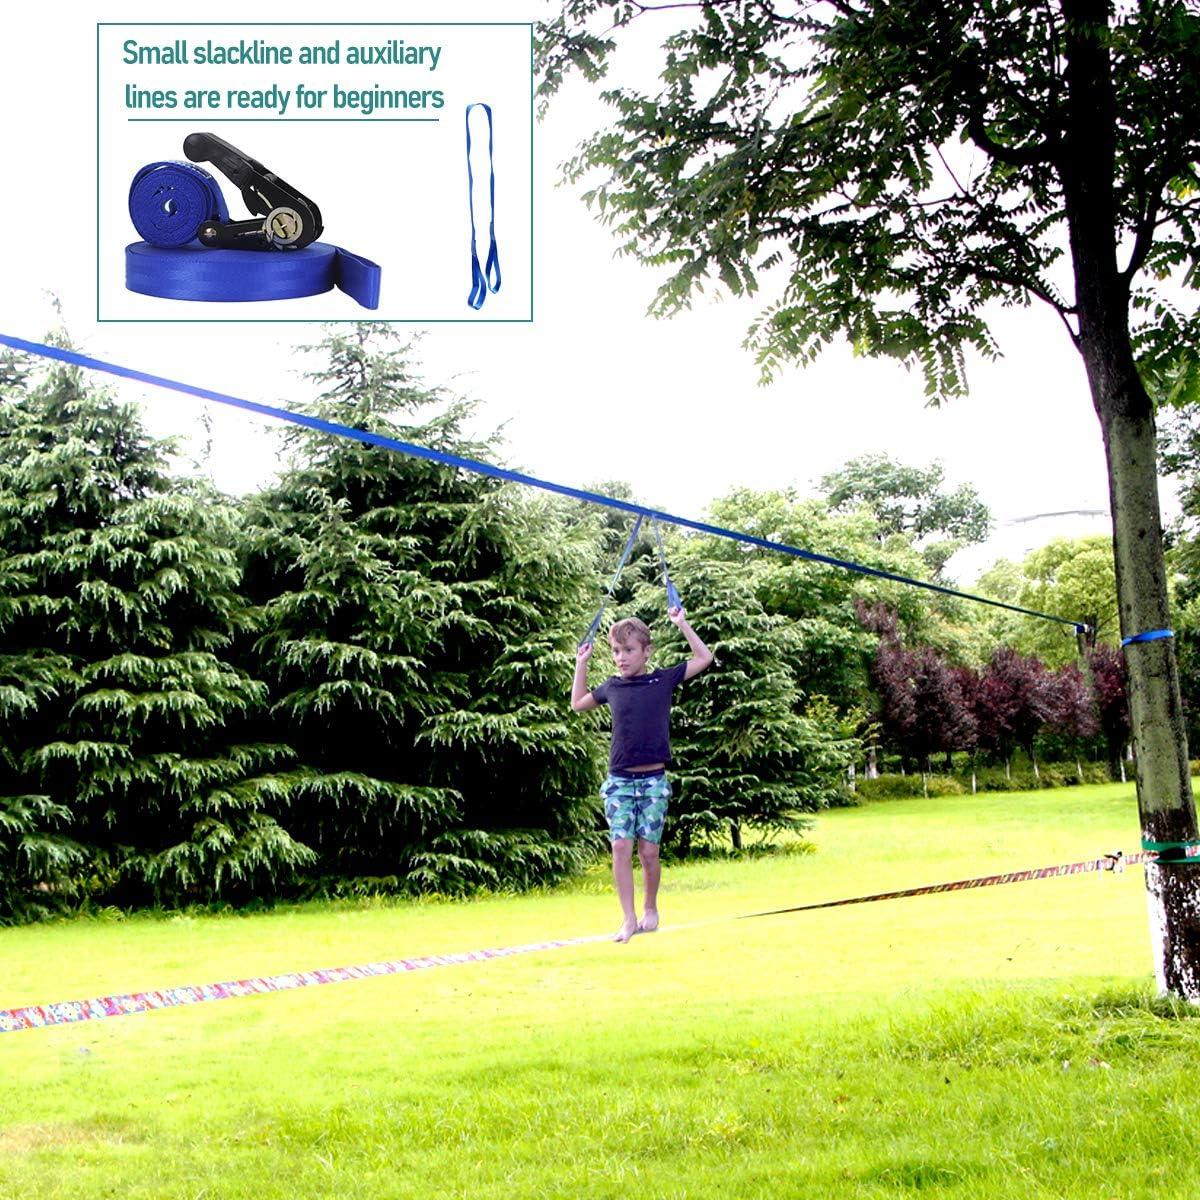 Gentle Booms Sports 250ft Slackline kit with Tree Protectors, Carry Bag,  Arm Trainer, Backyard Outdoor Slackline kit, Ninja Warrior Slackline